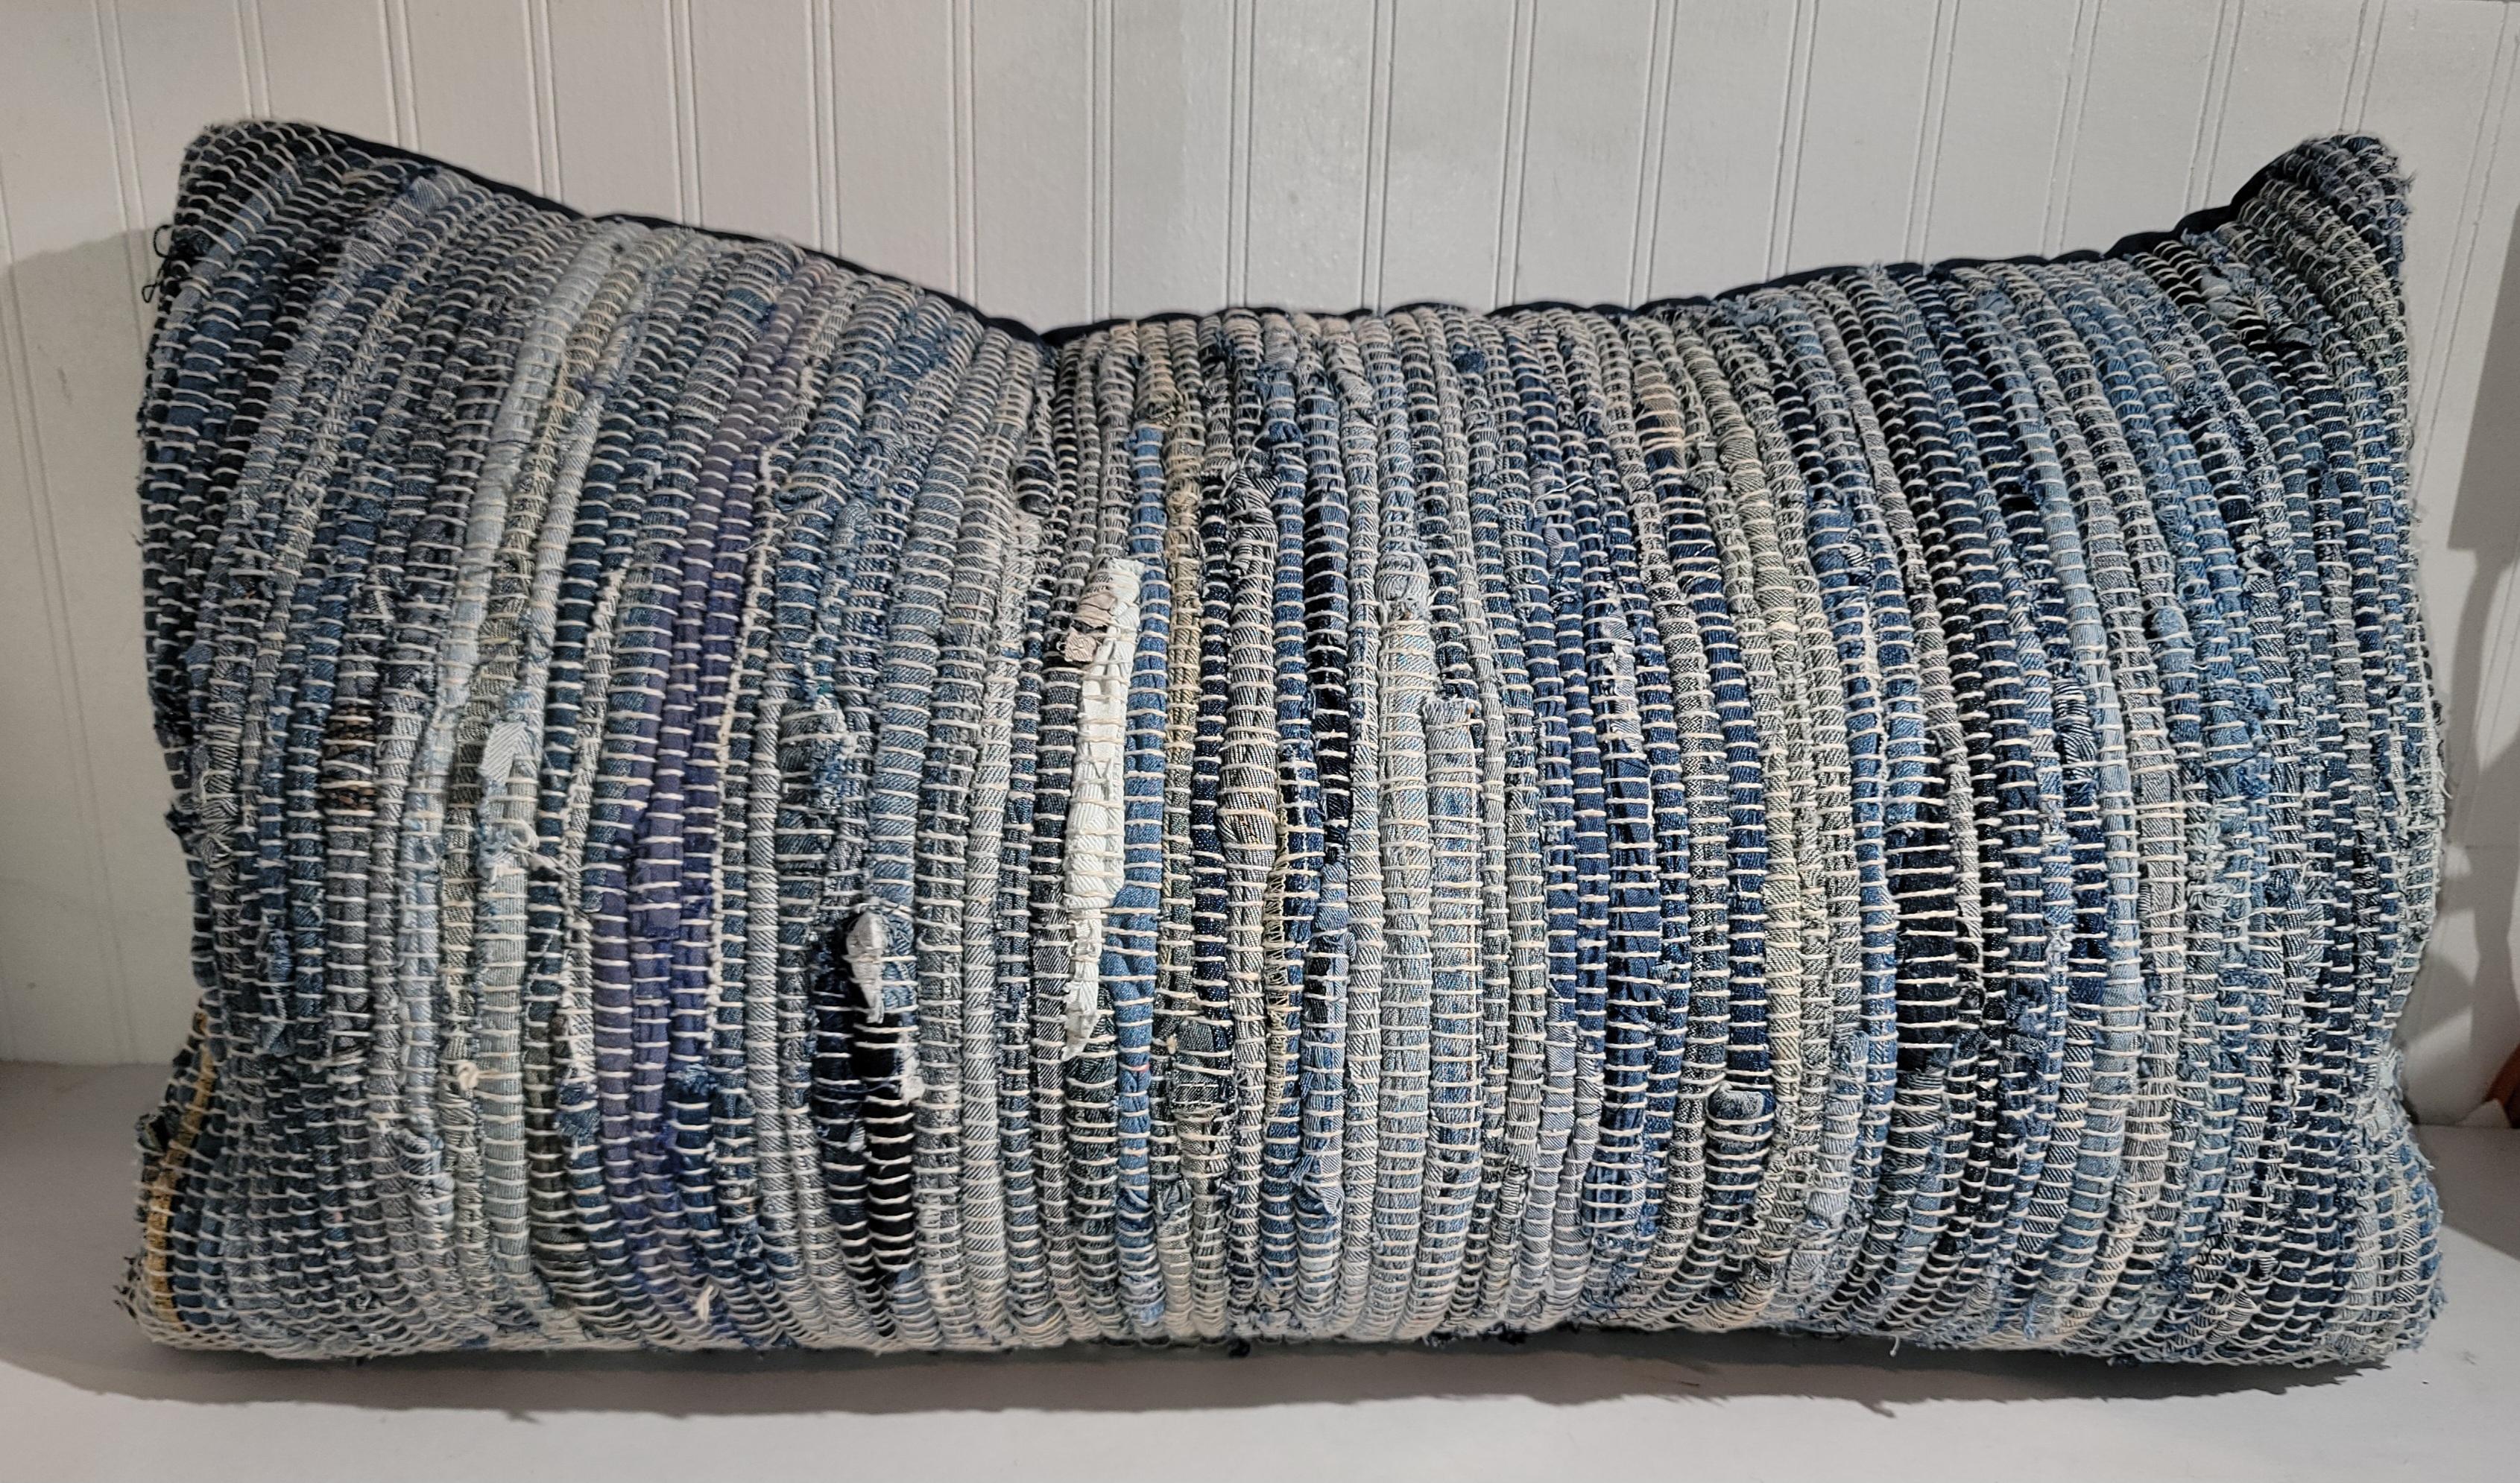 Rag Rug Bolster Pillows  In Good Condition For Sale In Los Angeles, CA